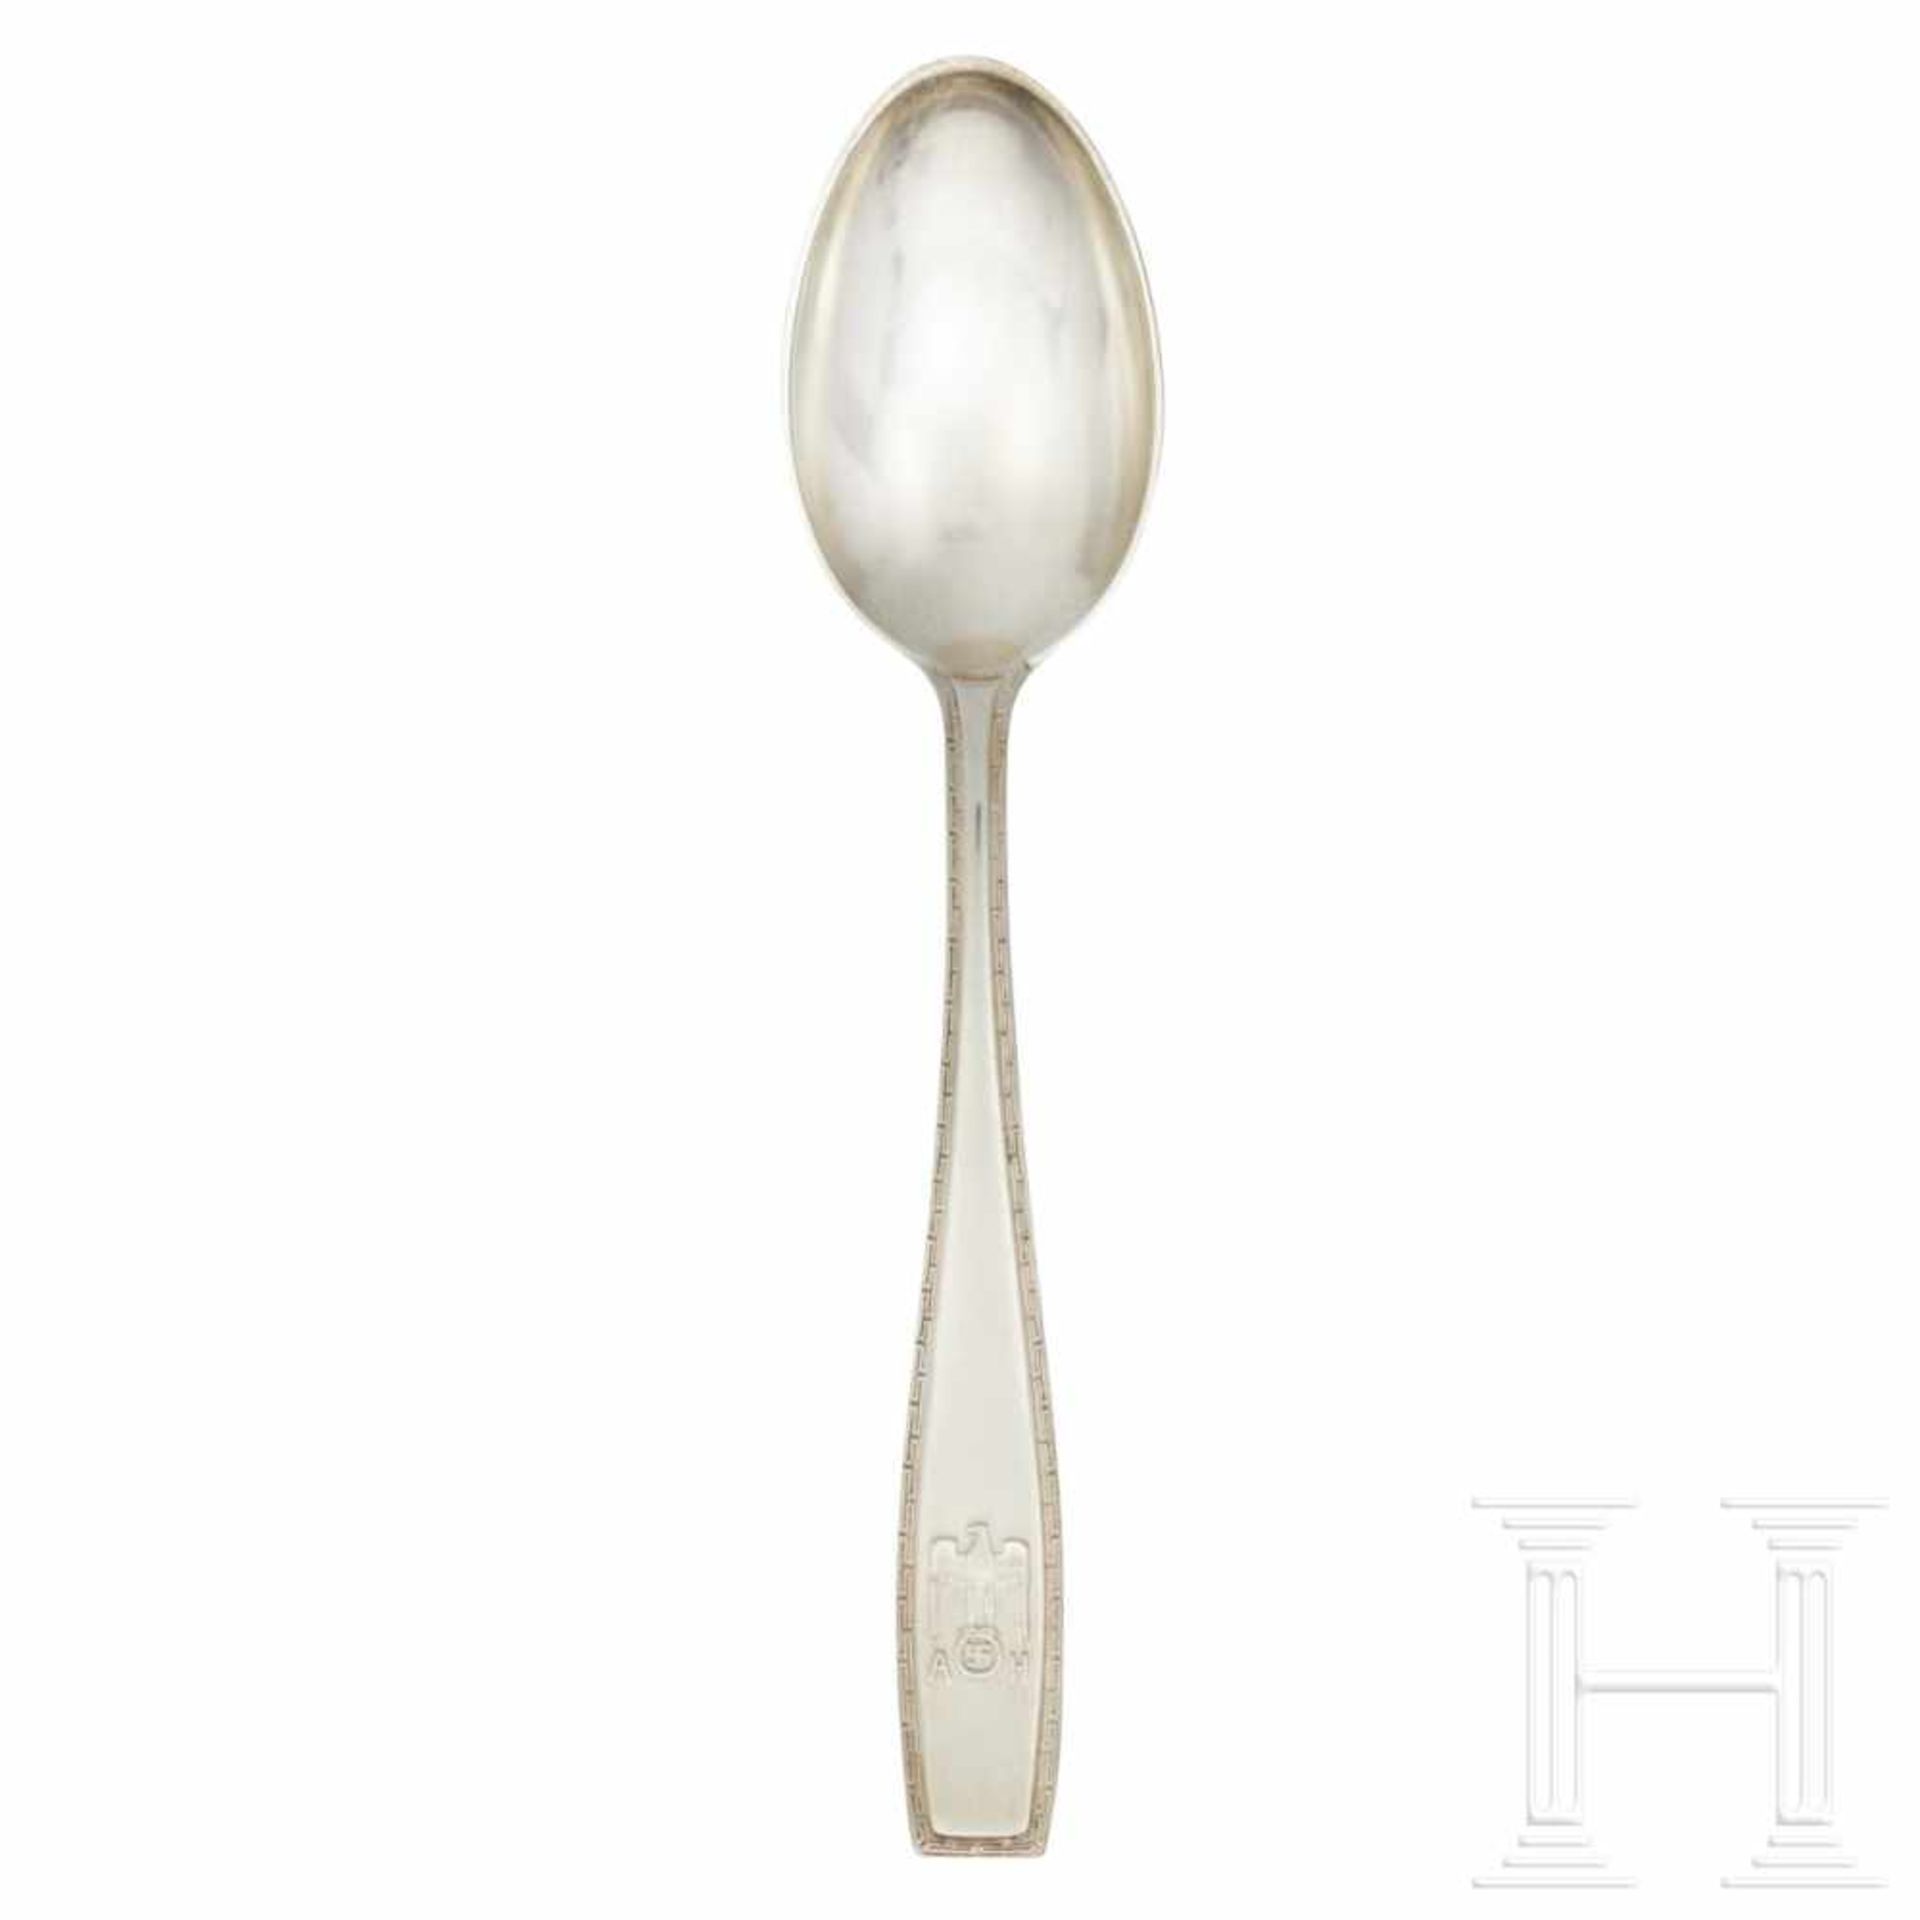 Adolf Hitler – a Lunch Spoon from his Personal Silver ServiceSo called “formal pattern” with